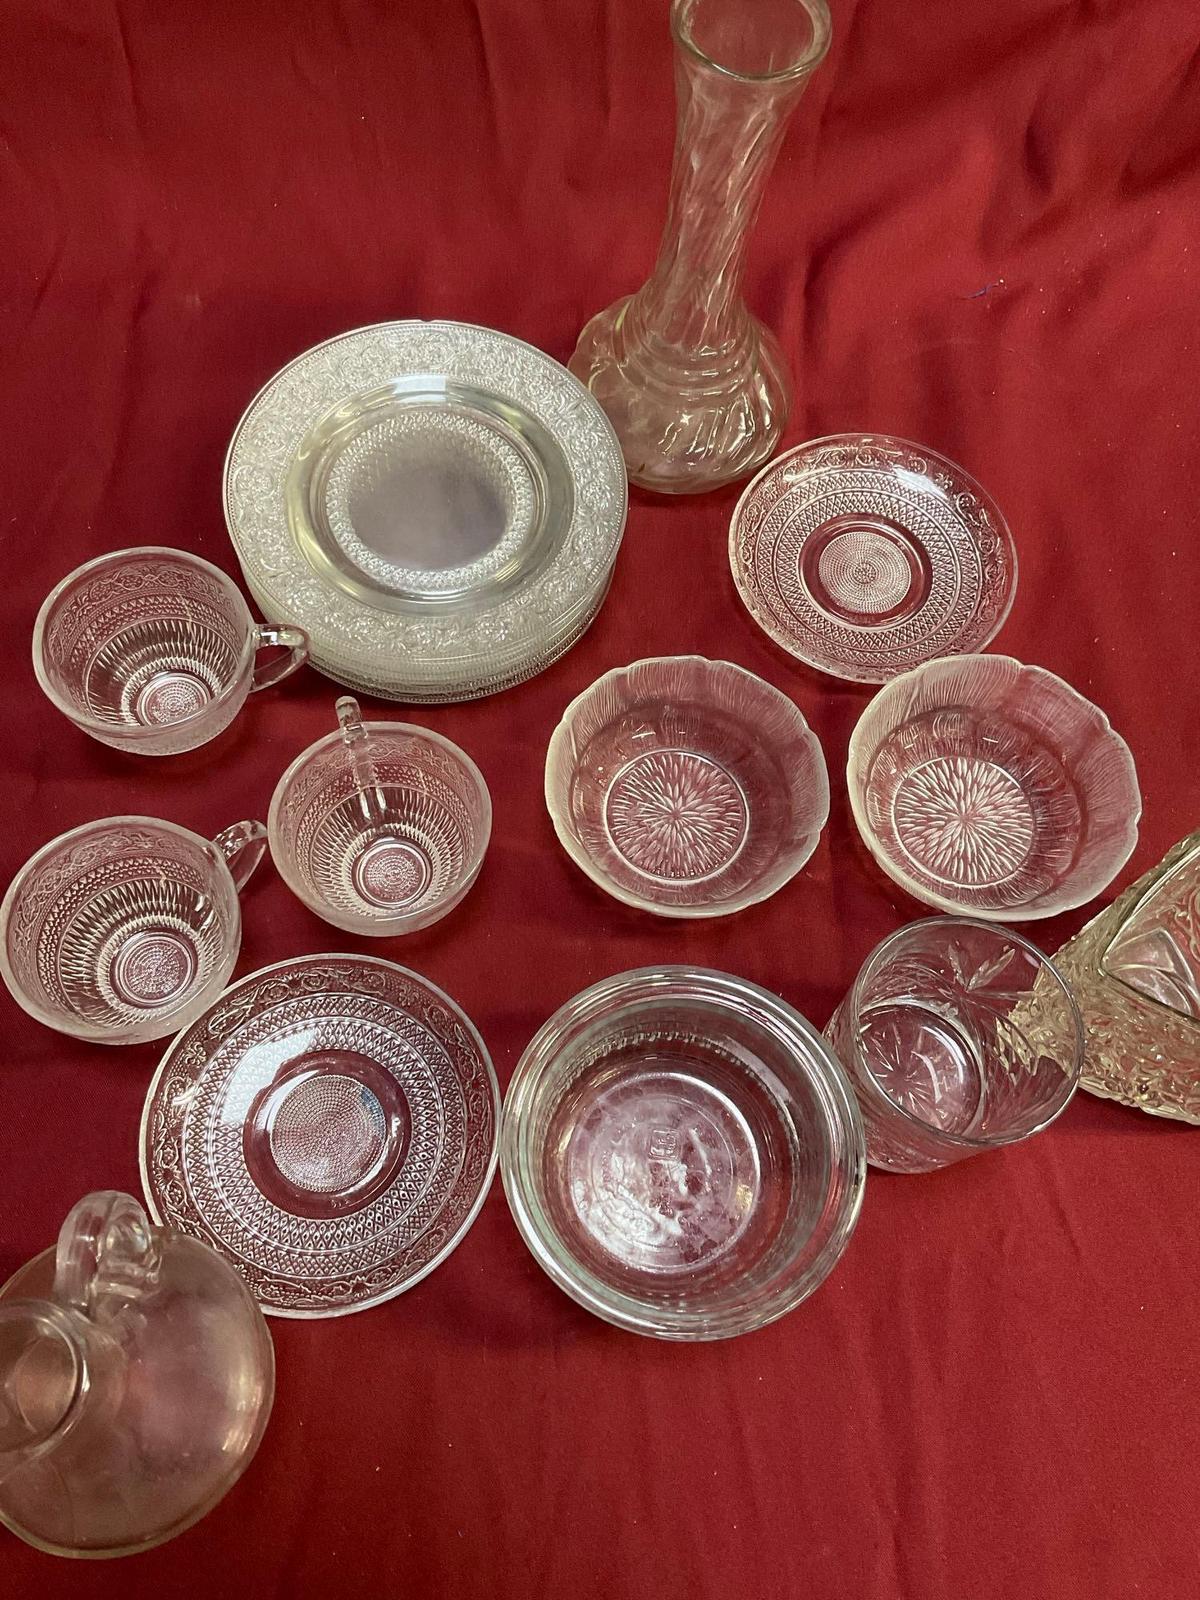 Assorted glass items, vase, plates, cups, etc. 19 pieces